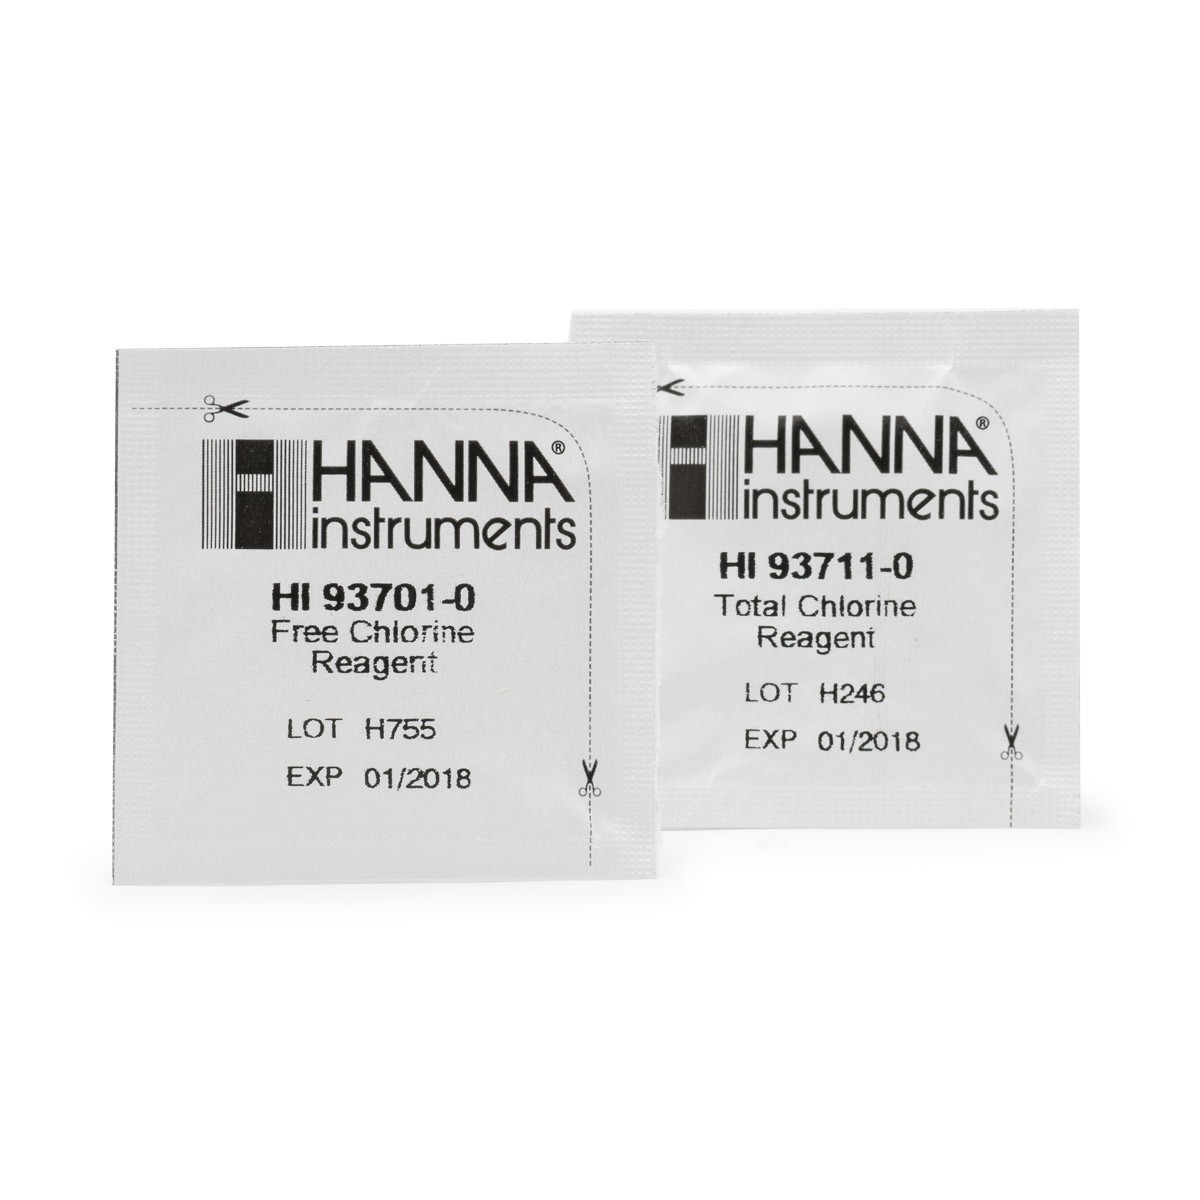 HI38017-200 Free and Total Chlorine (Low and Medium Range) Test Kit Replacement Reagents (200 tests)